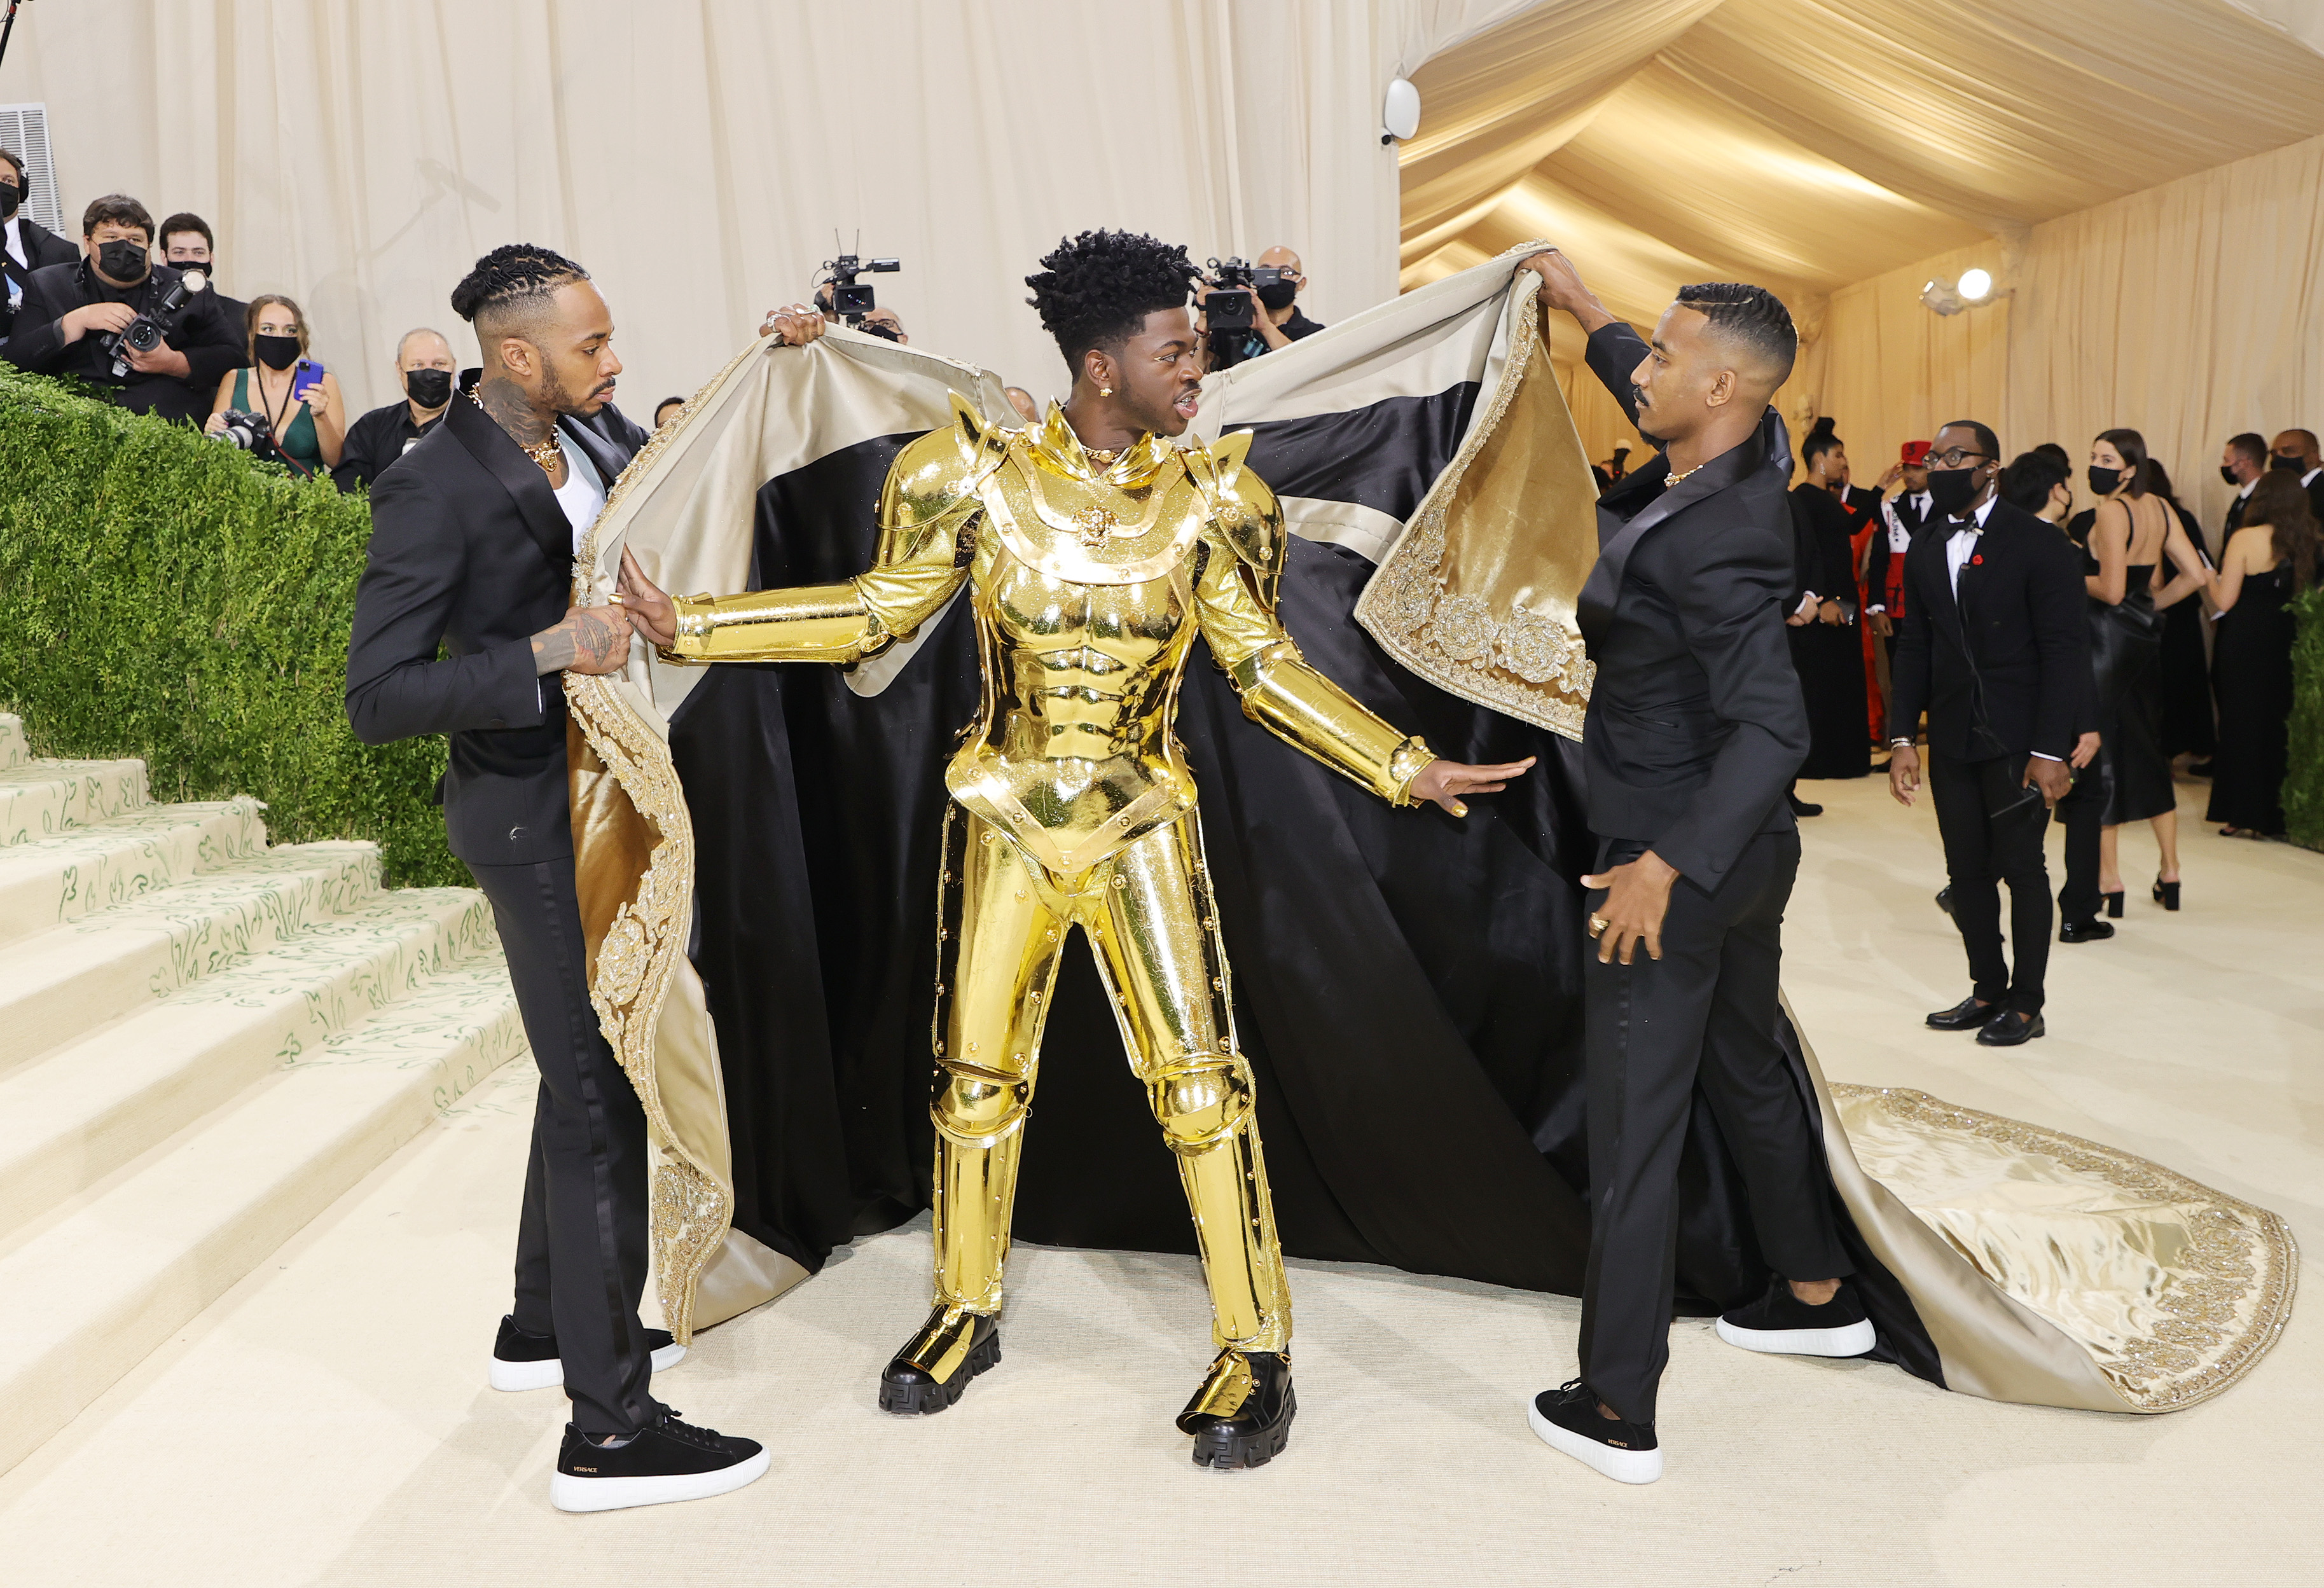 Lil Nas X attends The 2021 Met Gala Celebrating In America: A Lexicon Of Fashion at Metropolitan Museum of Art on September 13, 2021, in New York City.